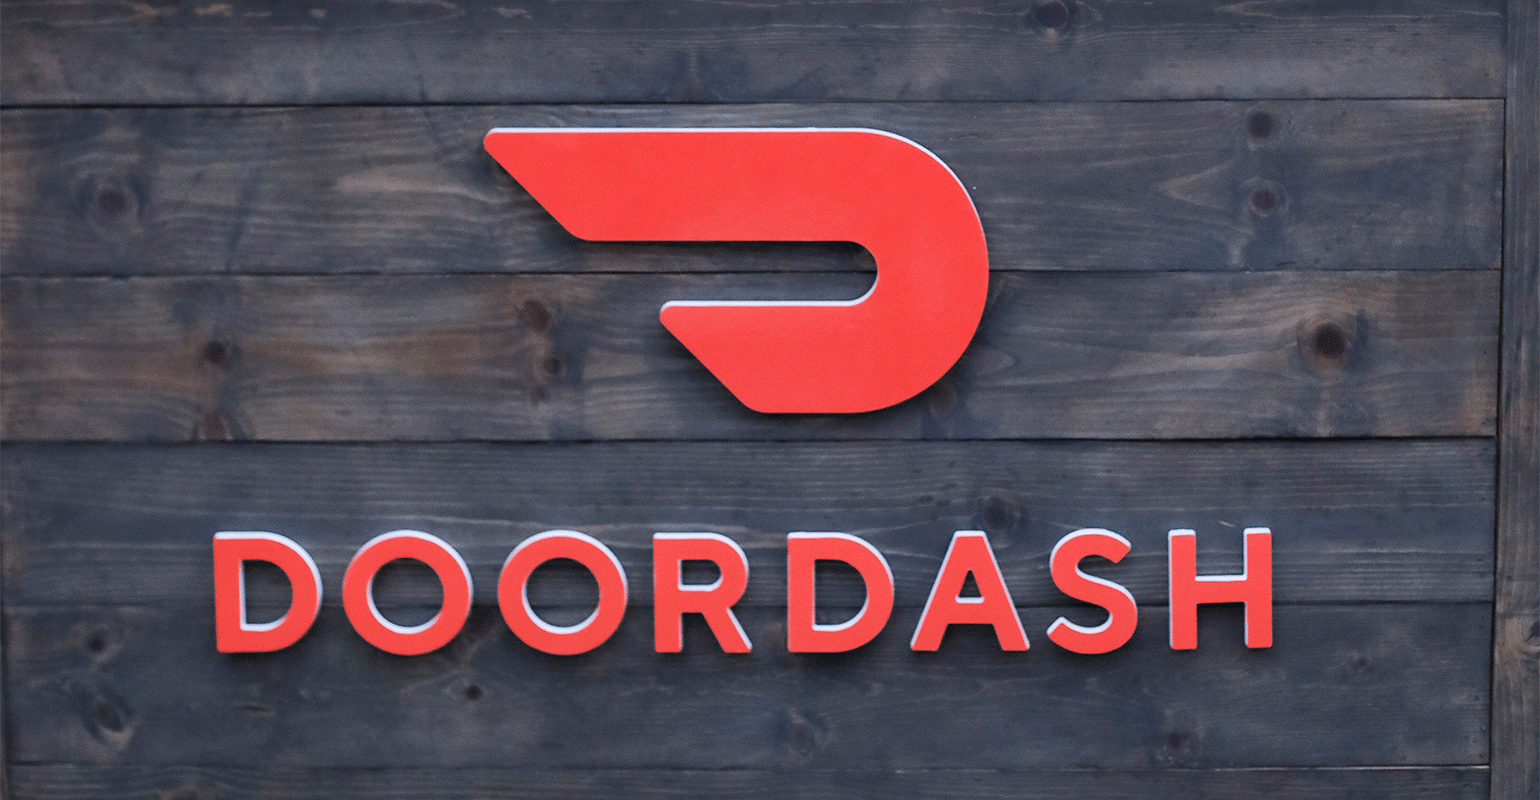 How Much Money Can You Make Per Month With Doordash?